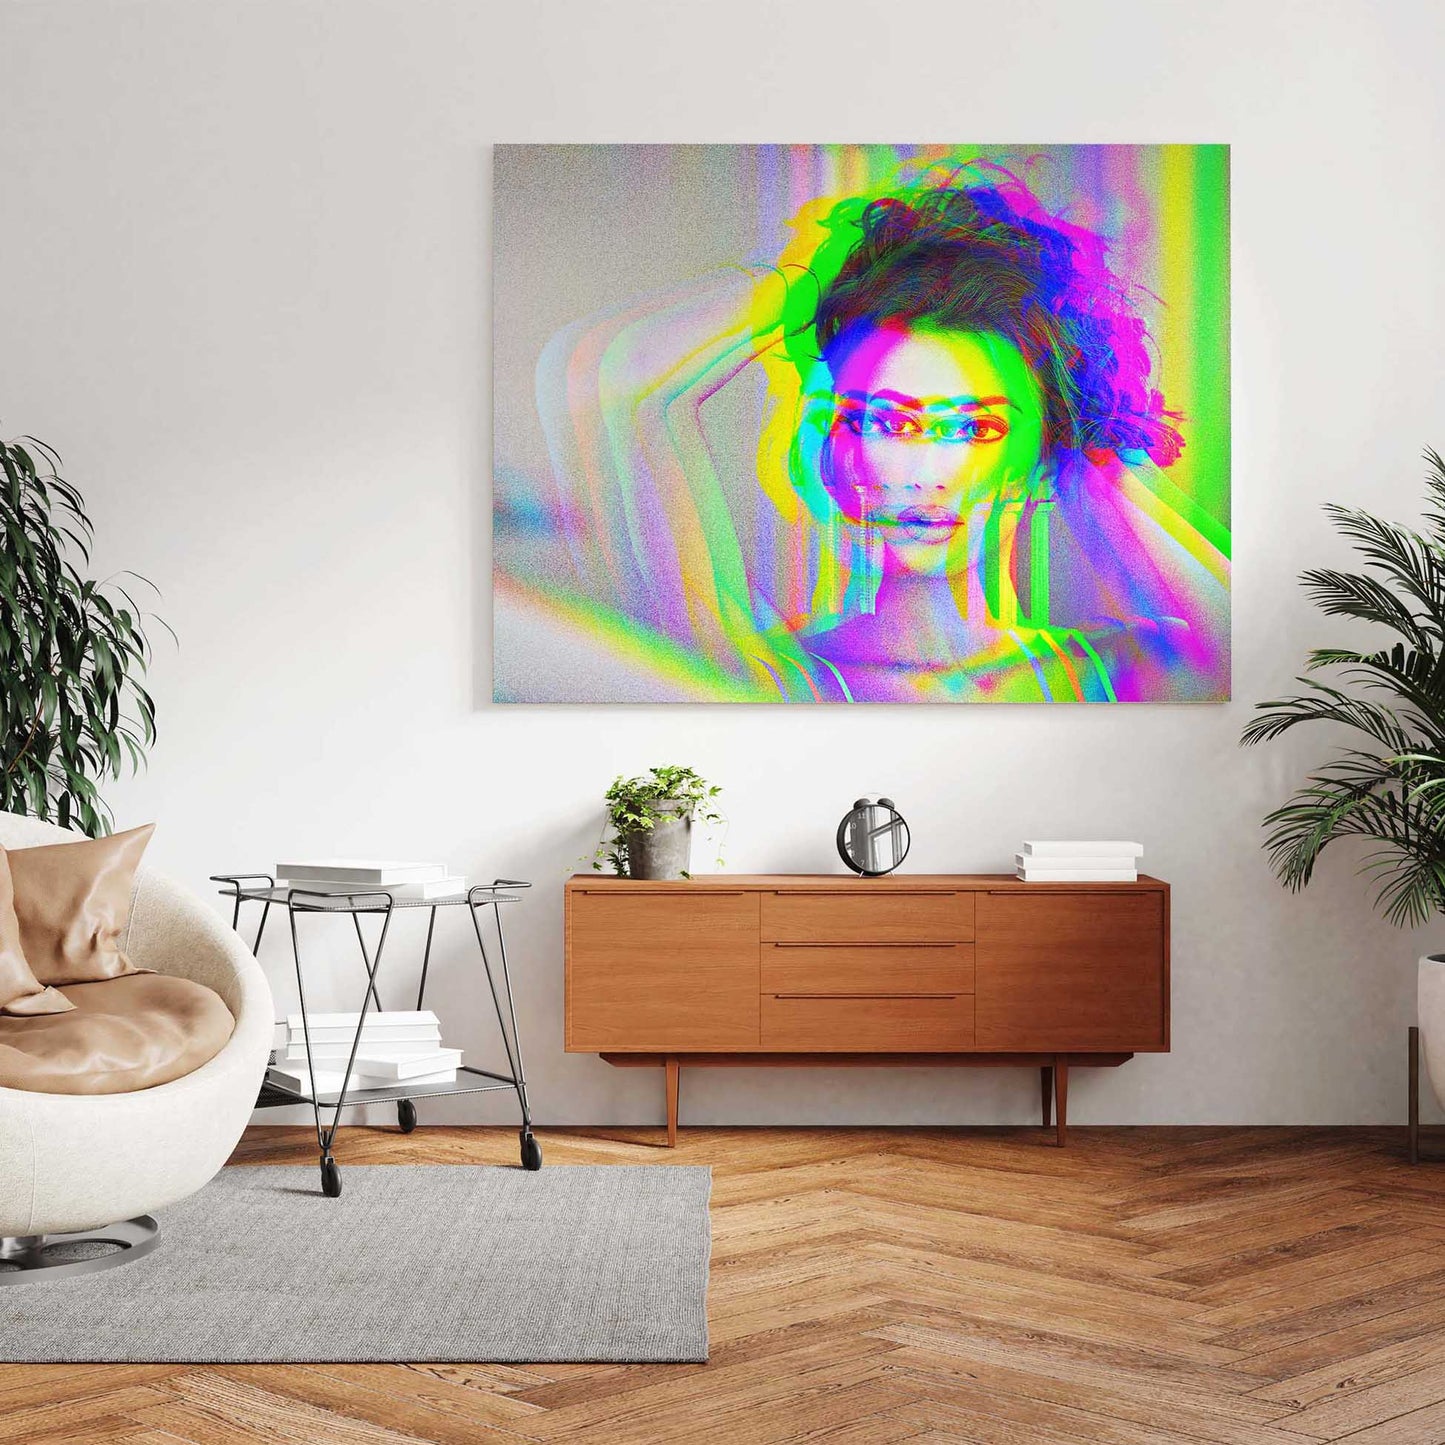 Transform your space with personalised anaglyph 3D canvases